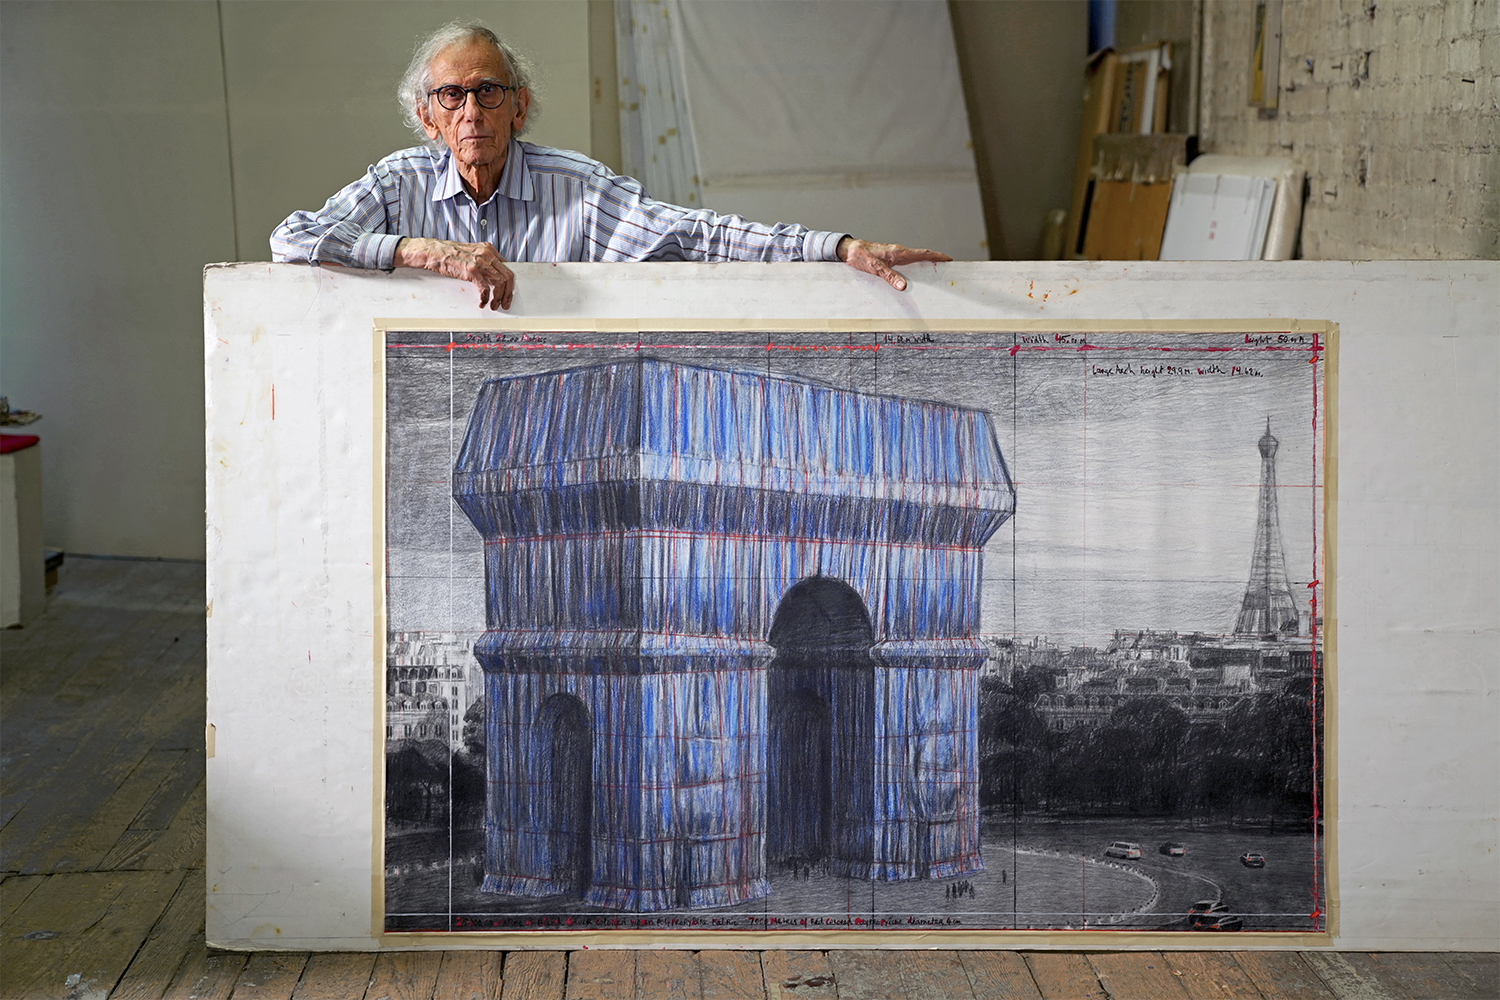 Christo's Wrap of the Arc de Triomphe Has an Opening Date - InsideHook